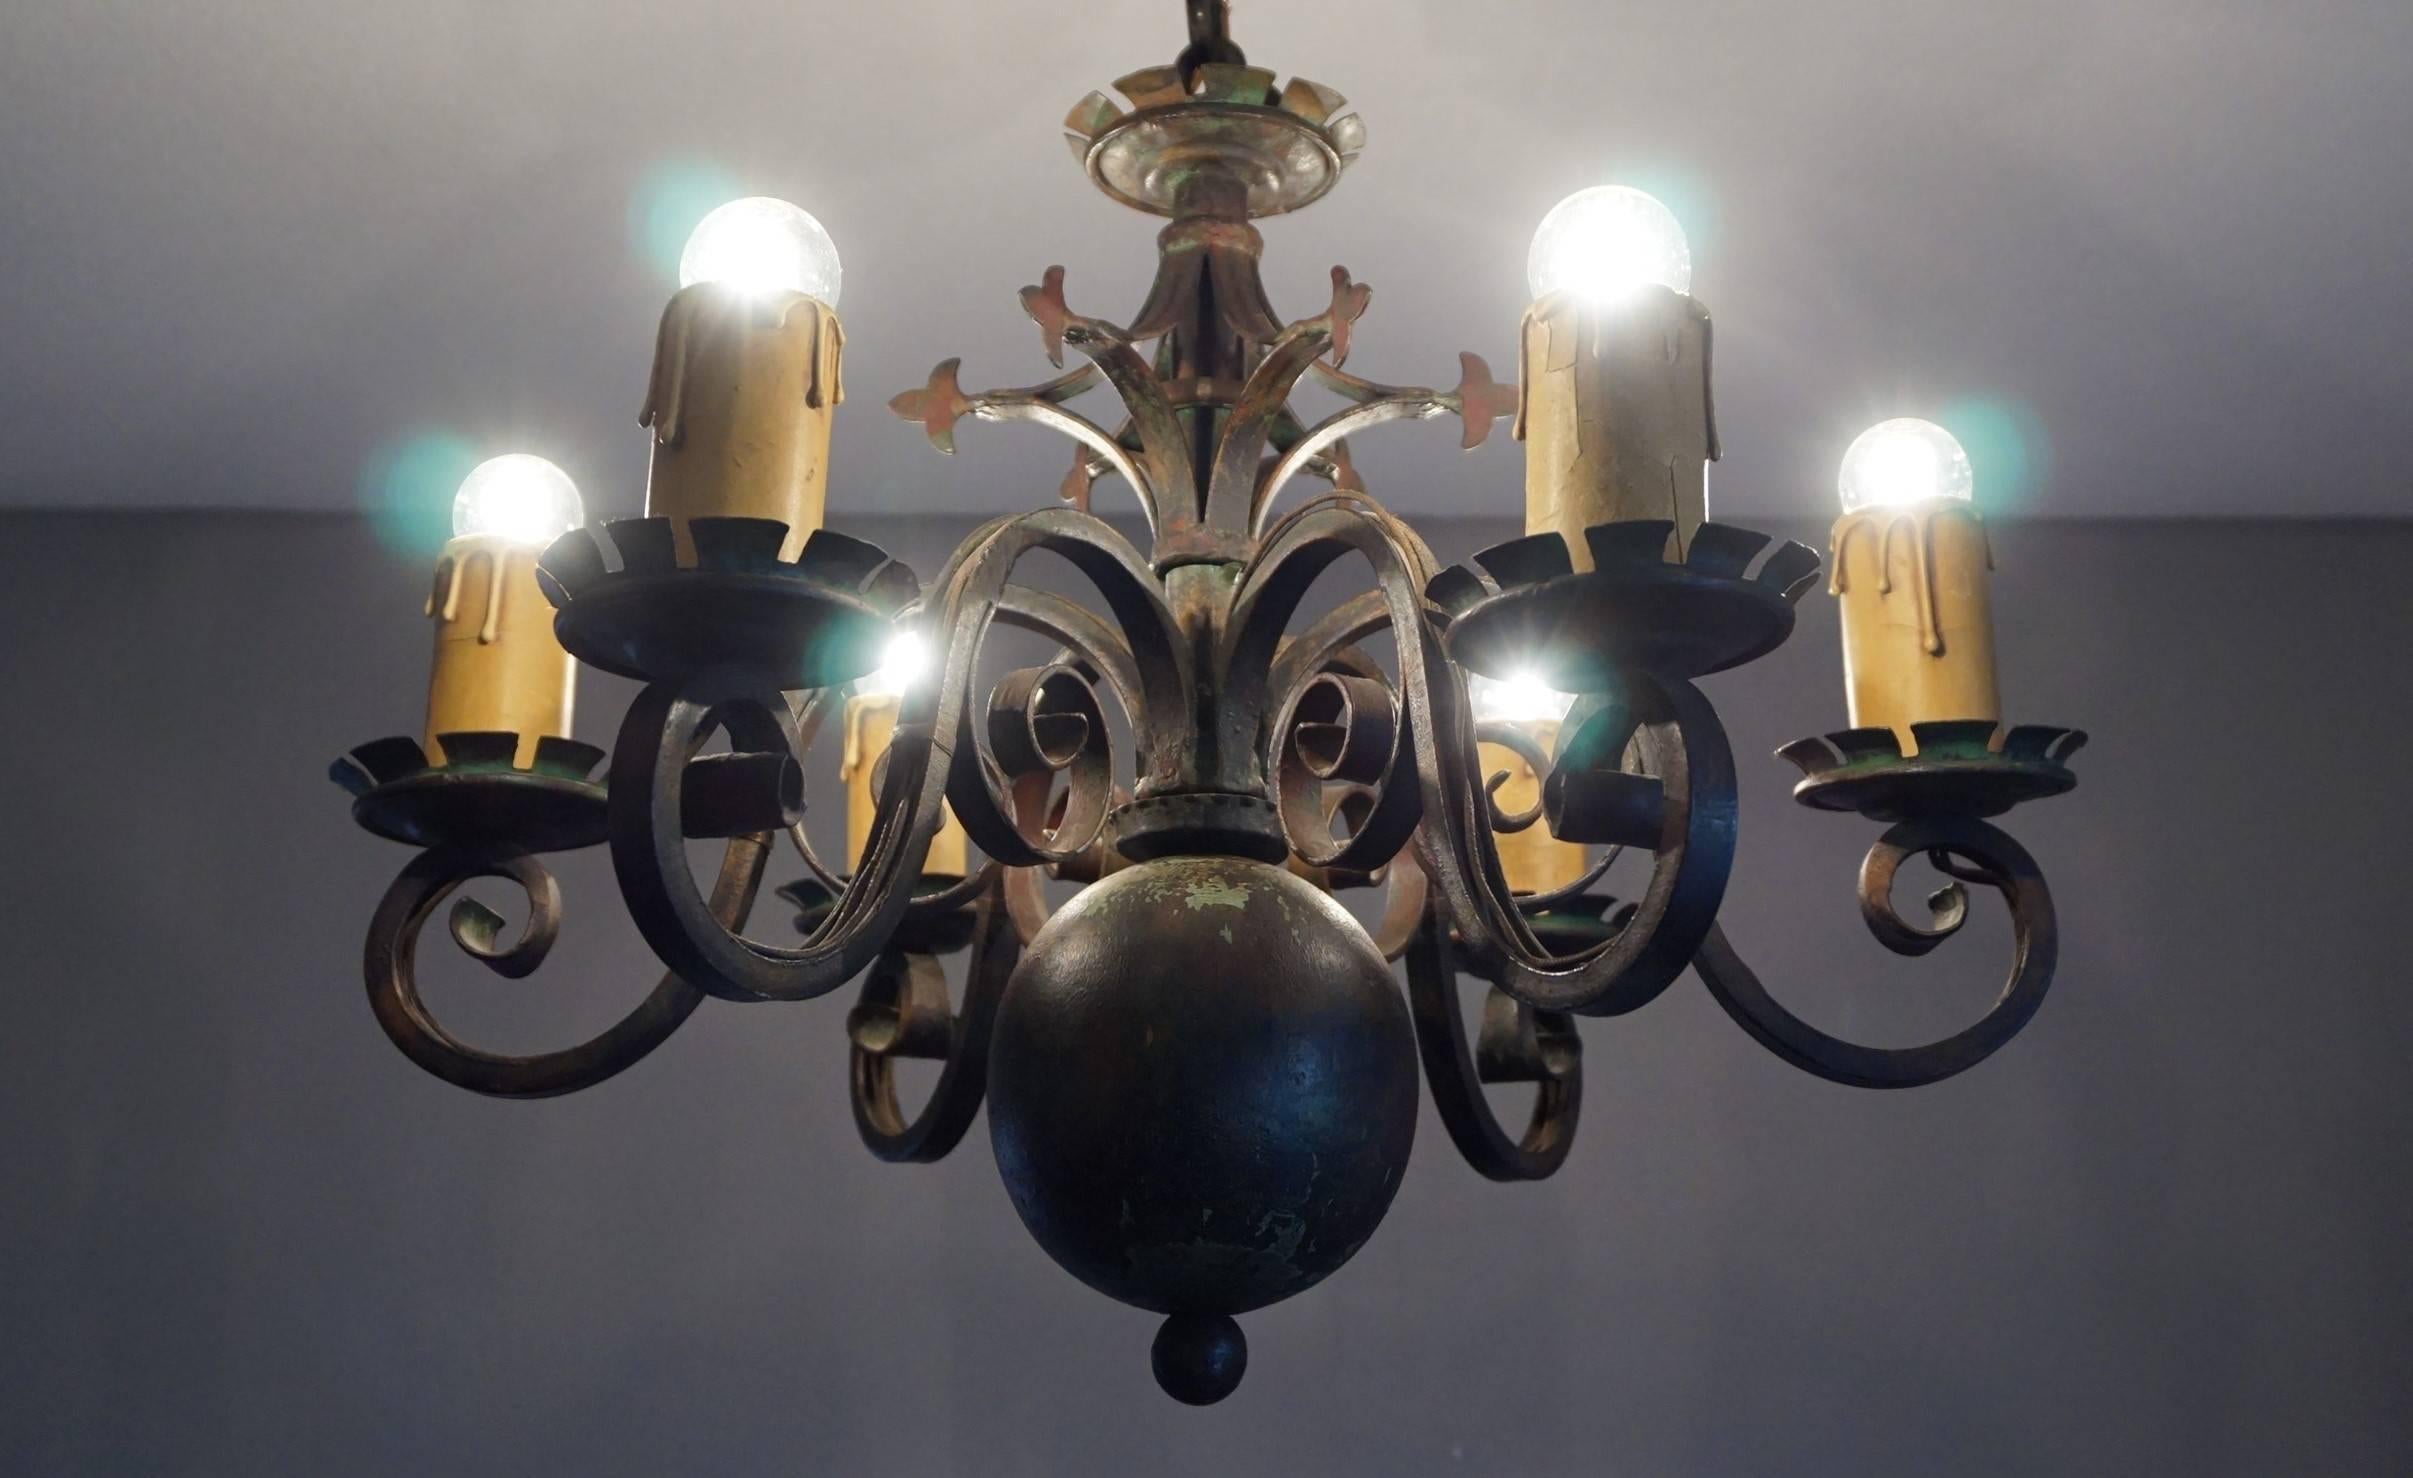 Handcrafted, early 20th century light fixture.

This small and all handcrafted chandelier from the early 1900s could be the ideal lighting solution for a room with a Gothic Revival and/or Mediëval theme. Finding craftsman in this day and age that